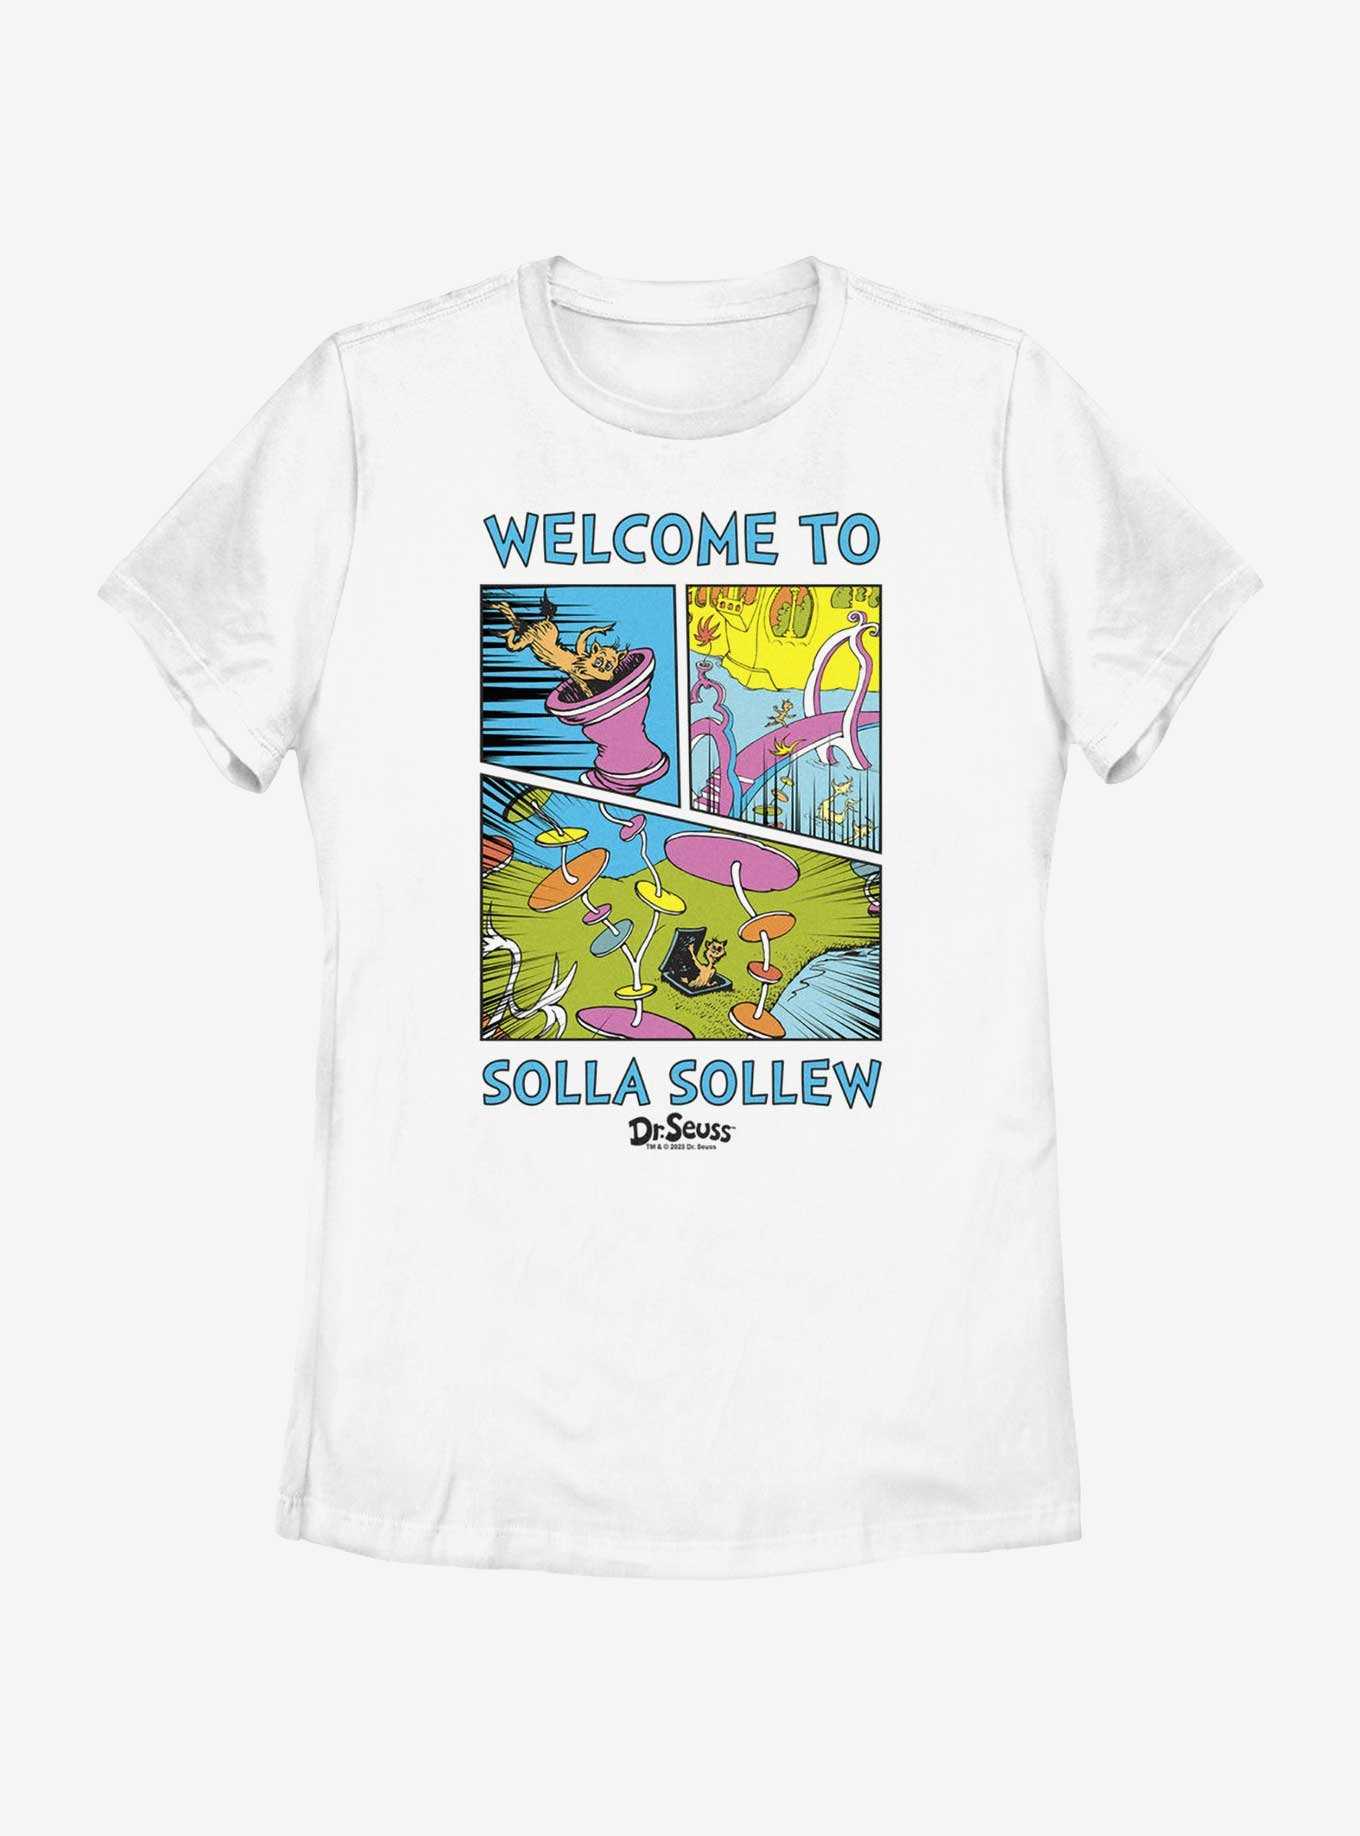 Dr. Seuss's I Had Trouble Getting Into Solla Sollew Welcome To Solla Sollew Womens T-Shirt, , hi-res